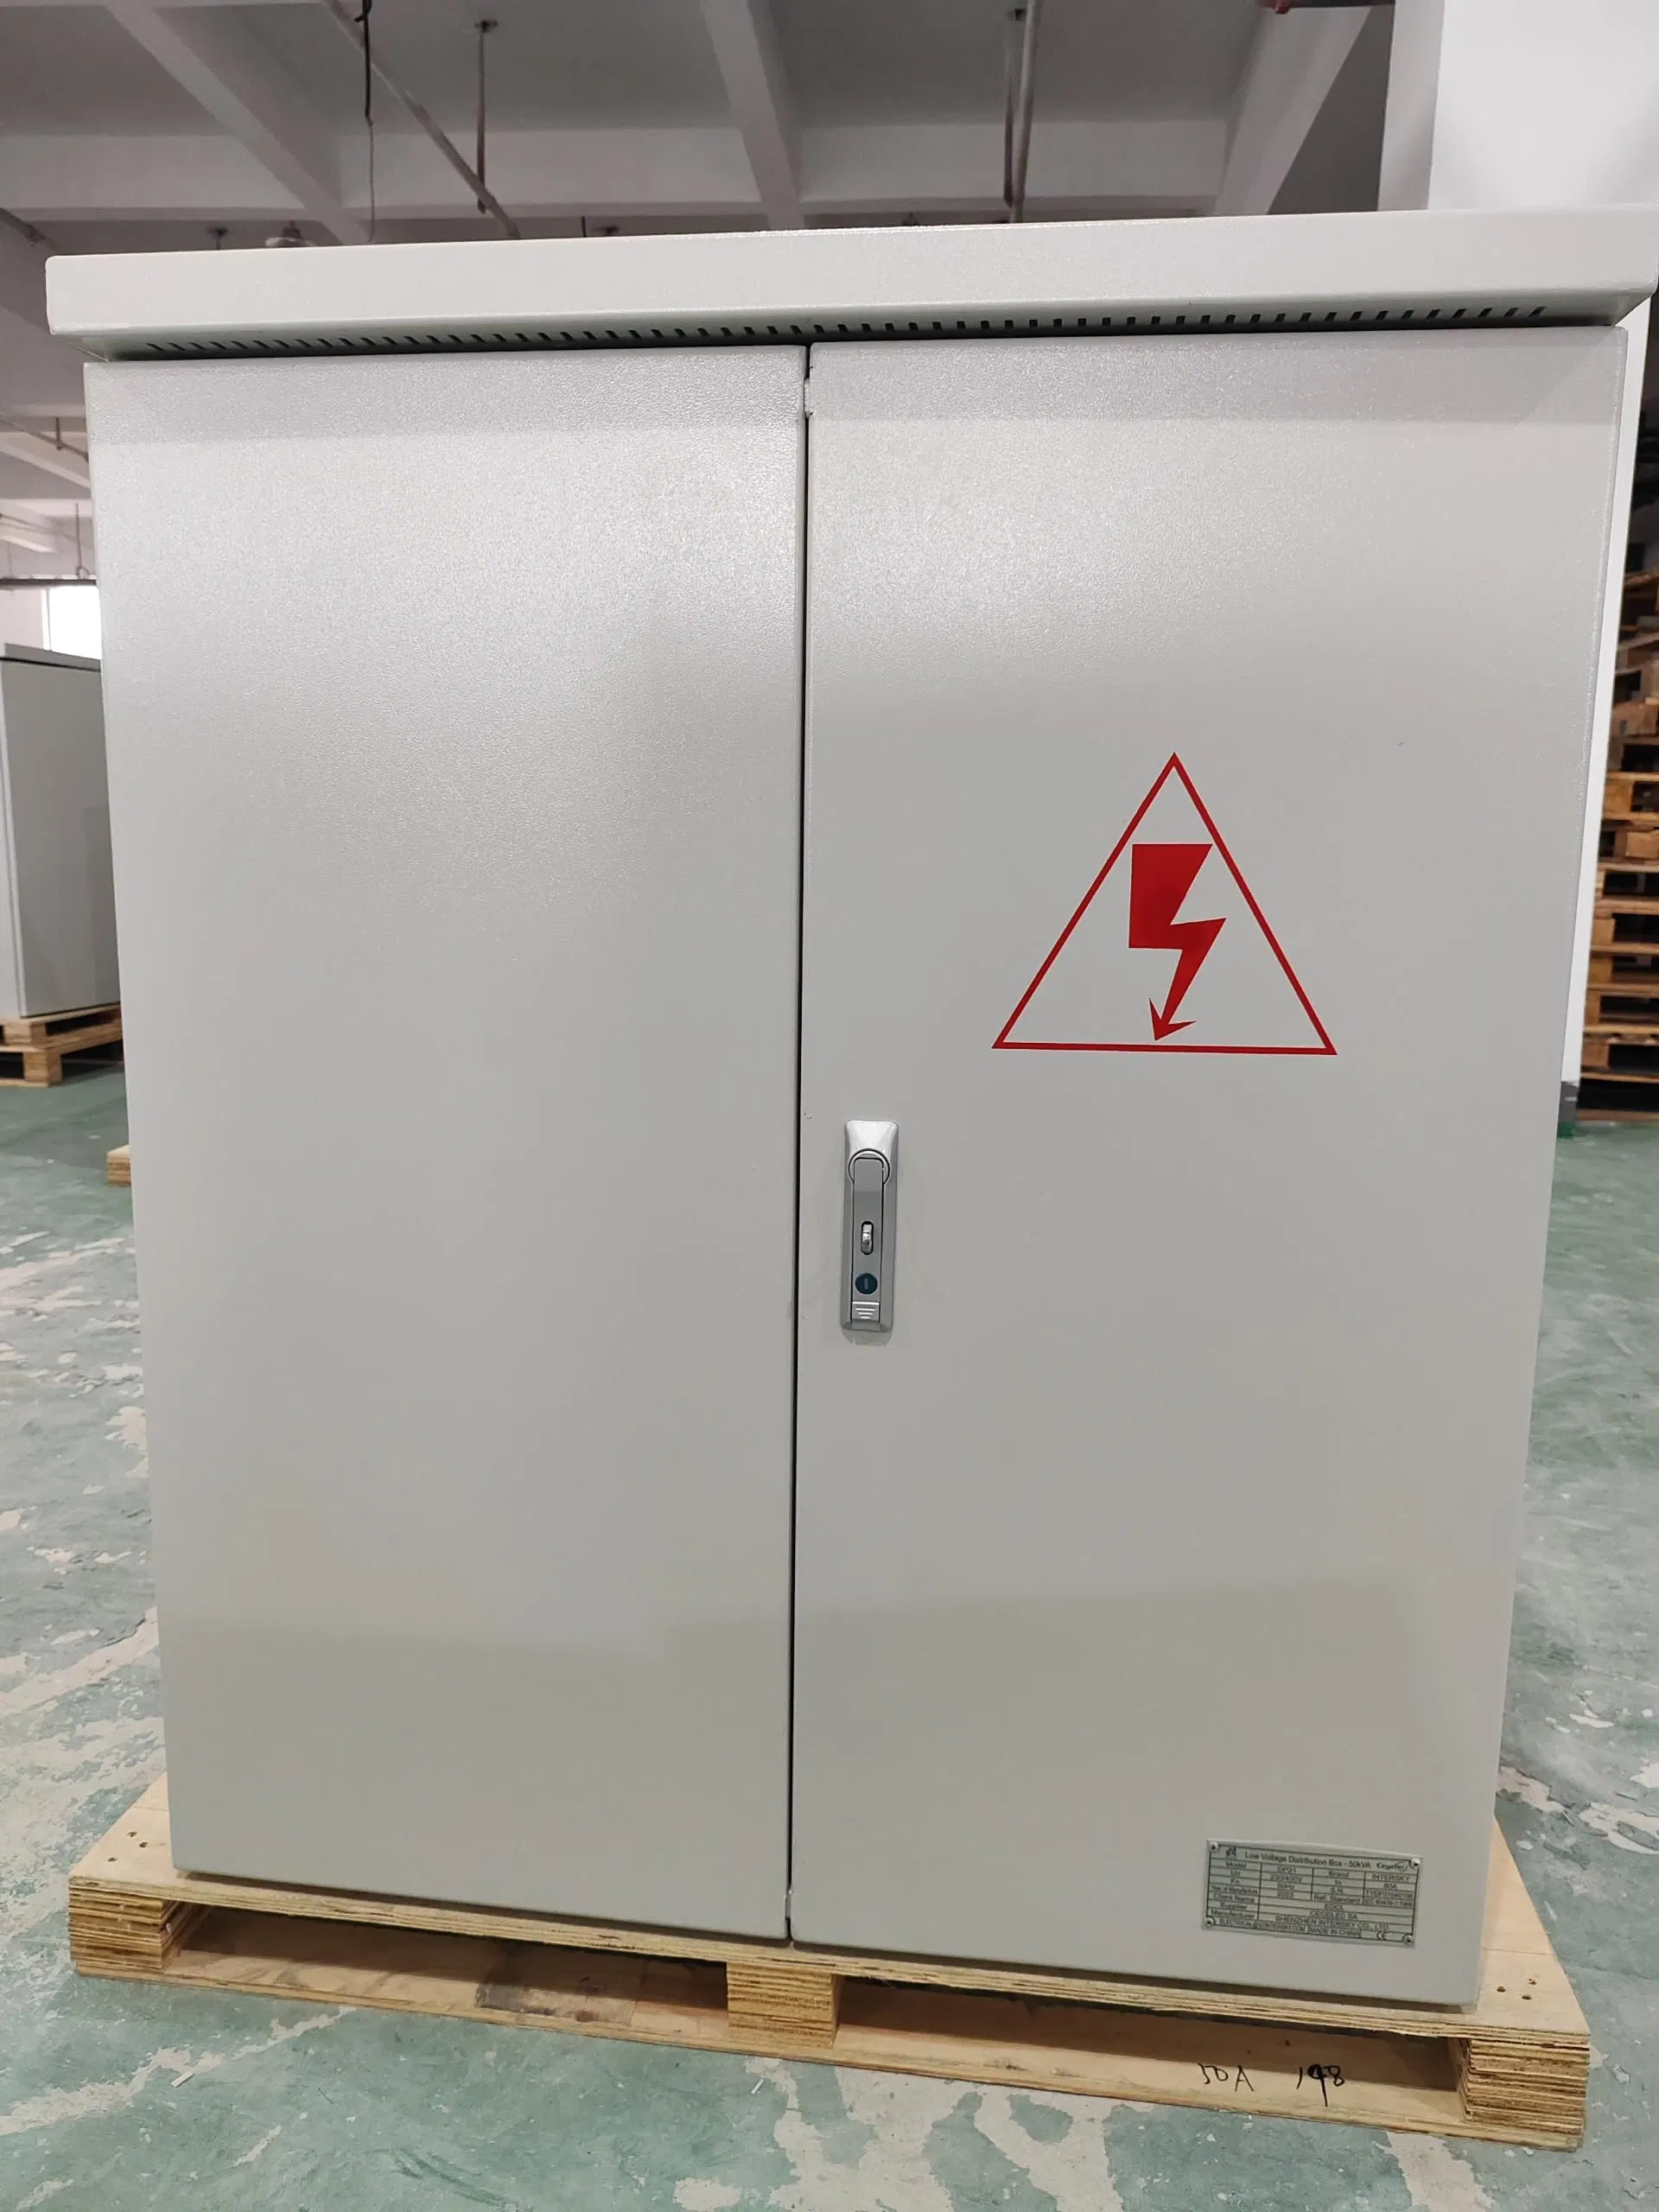 Low Voltage Electrical Power Distribution Equipment Distribution Panel Box